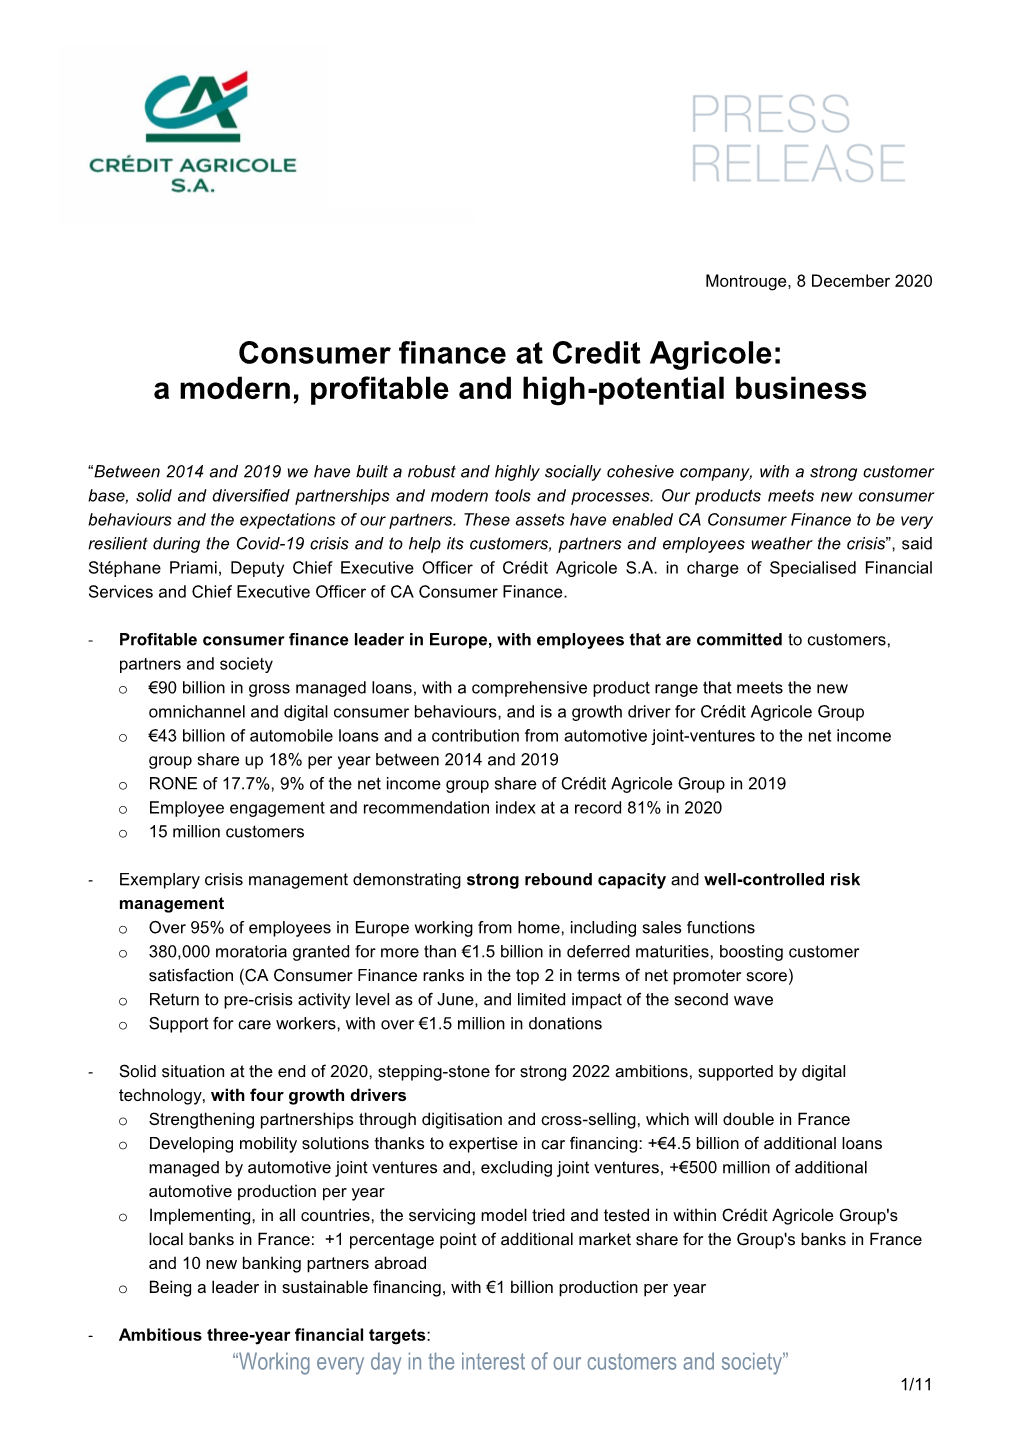 Consumer Finance at Credit Agricole: a Modern, Profitable and High-Potential Business